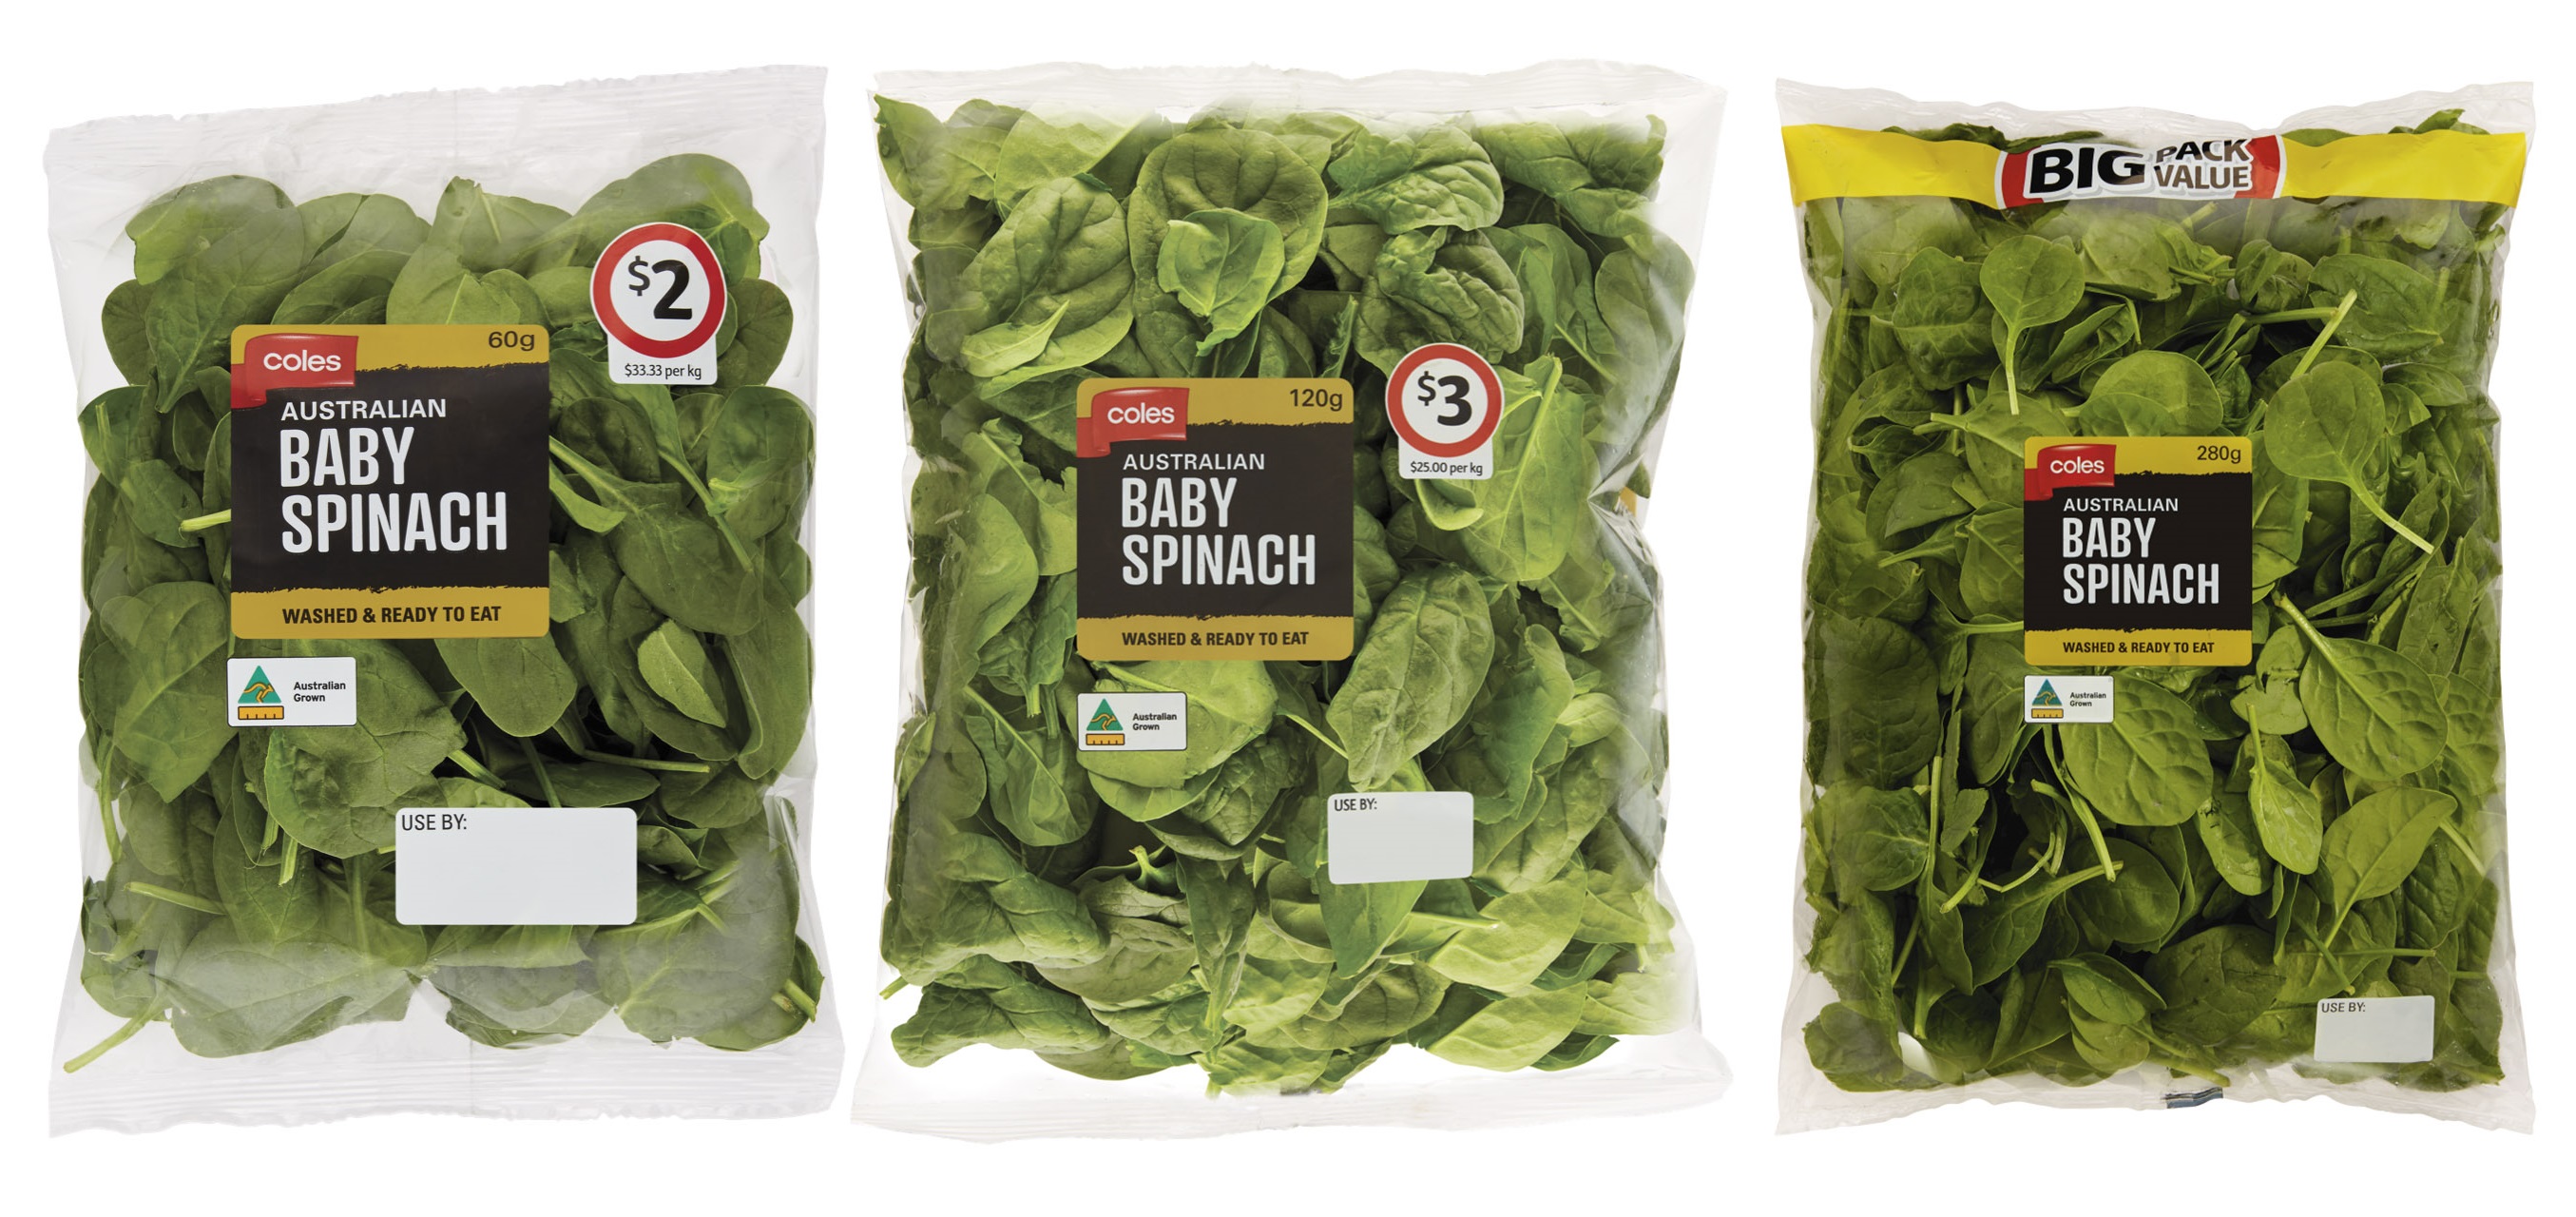 Salmonella fears prompt Coles to recall baby spinach